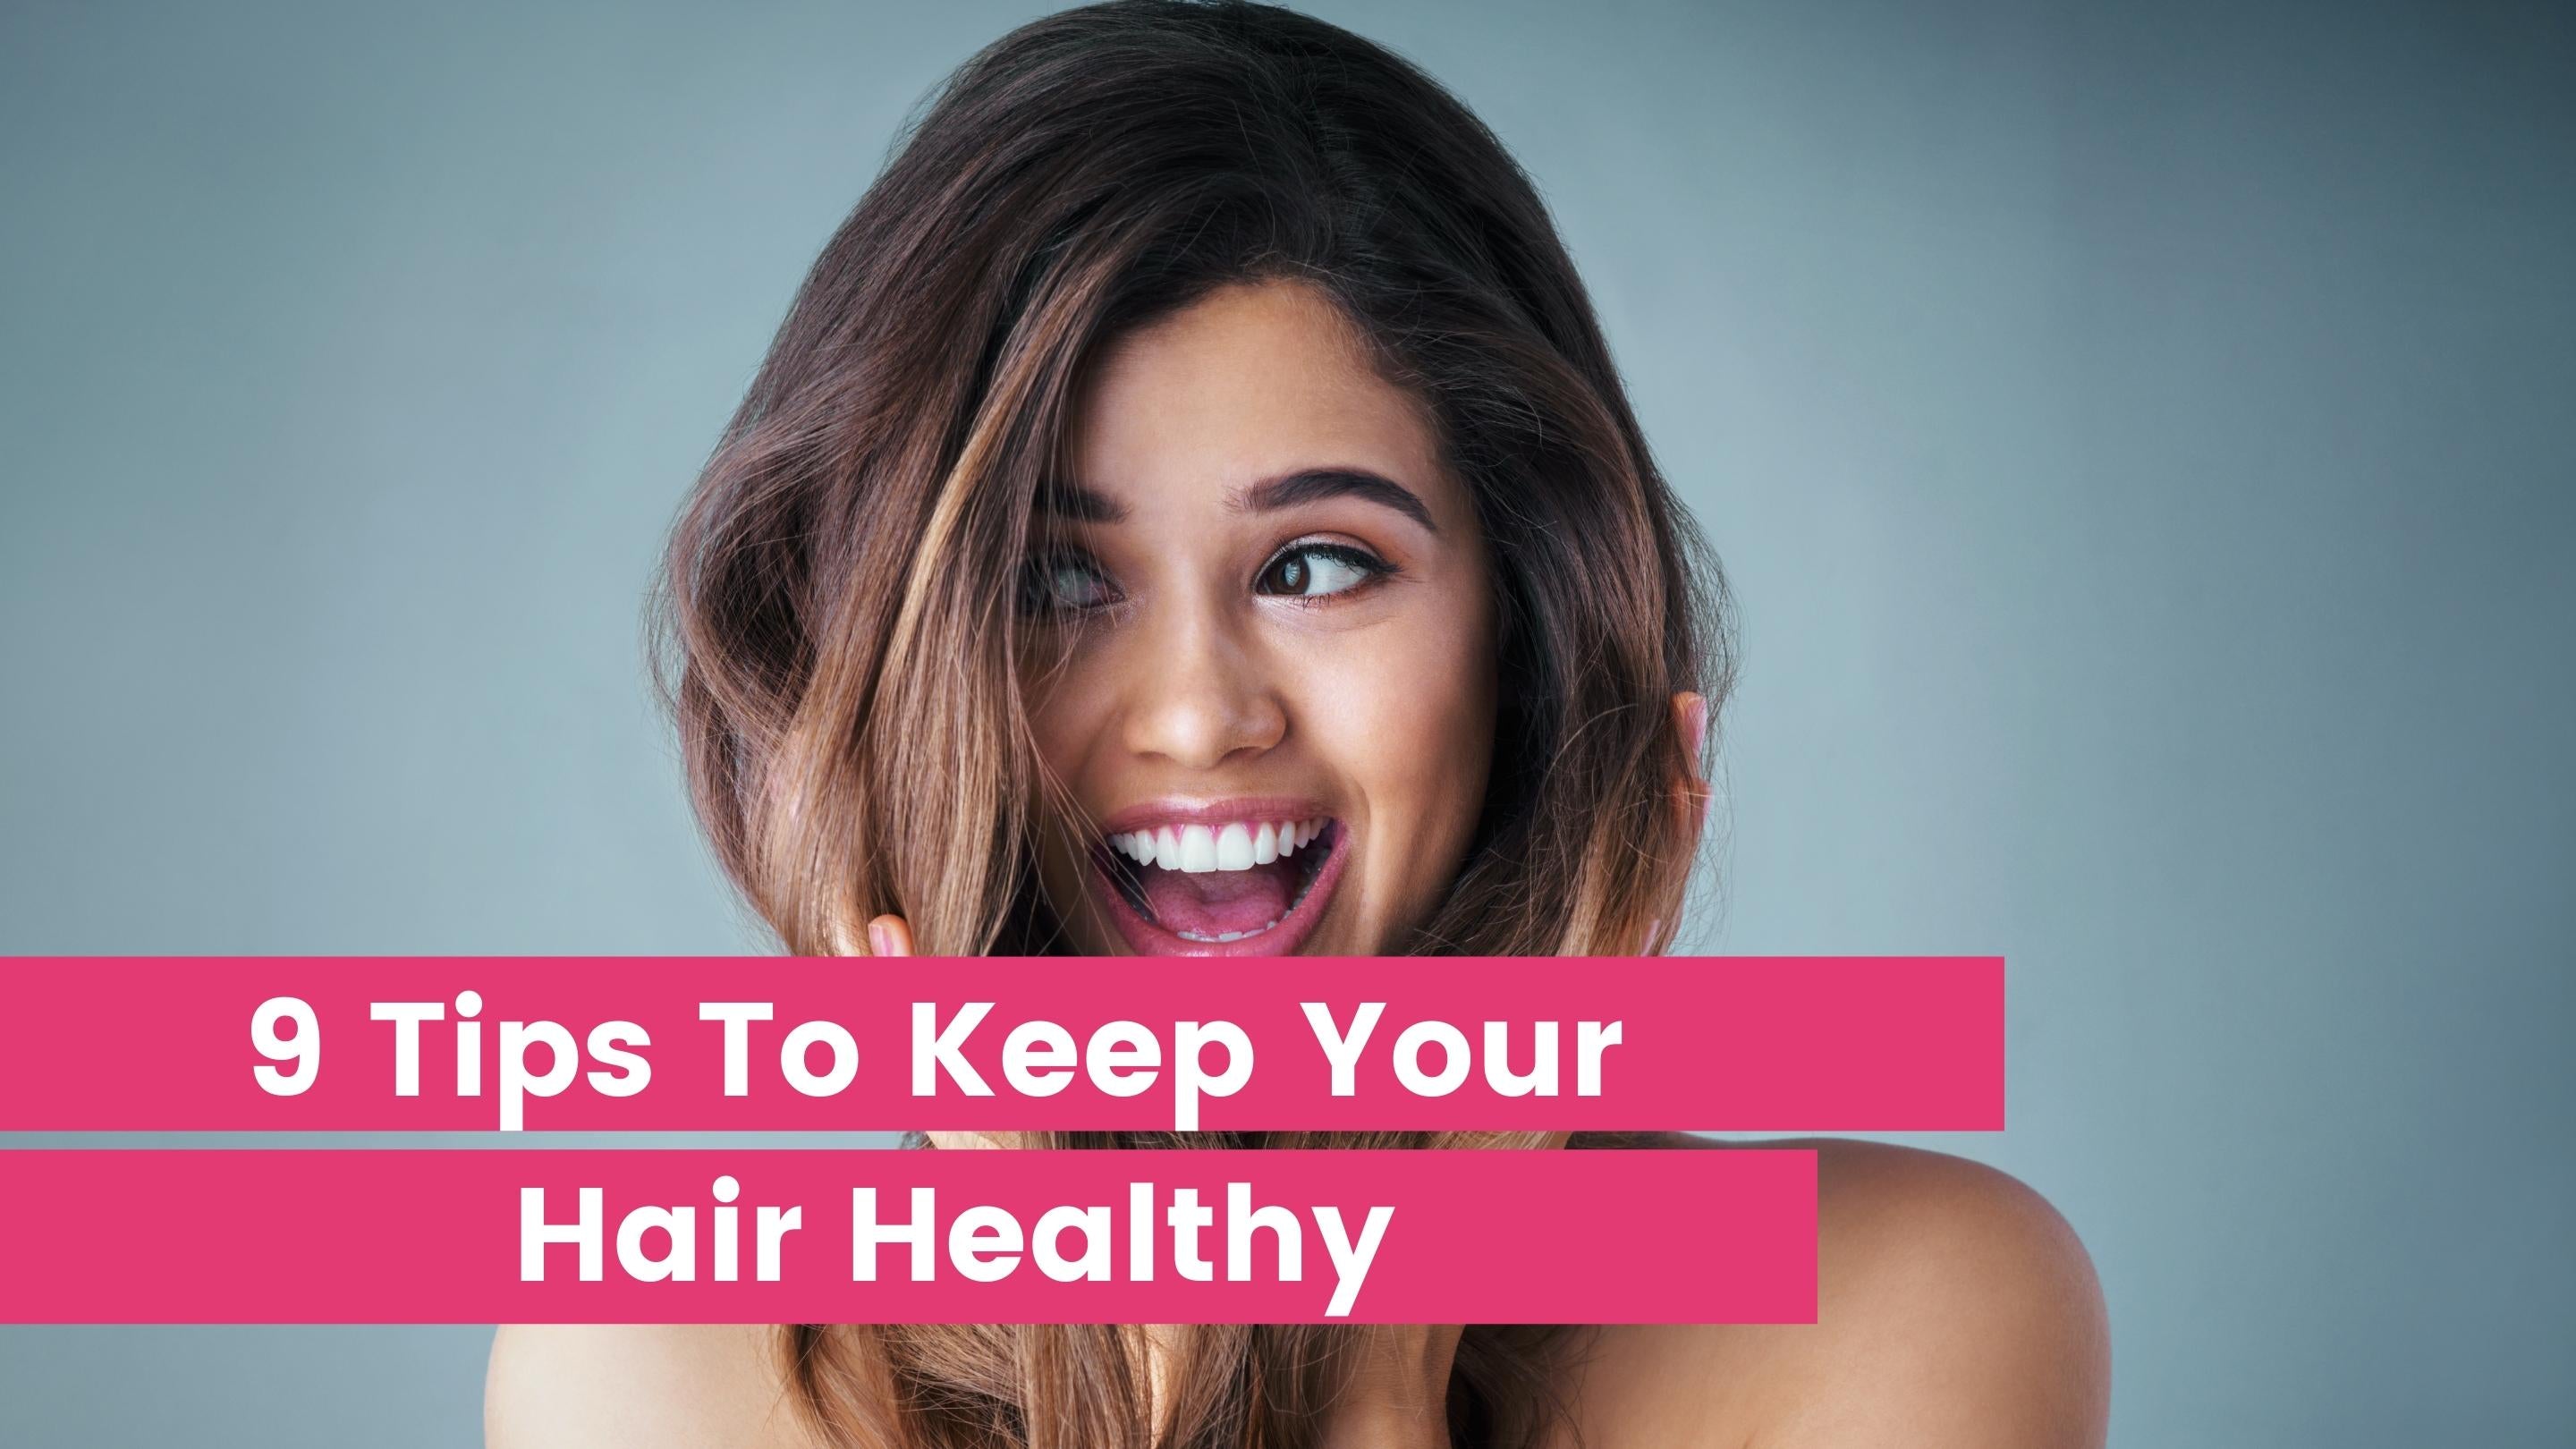 Tips to keeping your Hair Healthy